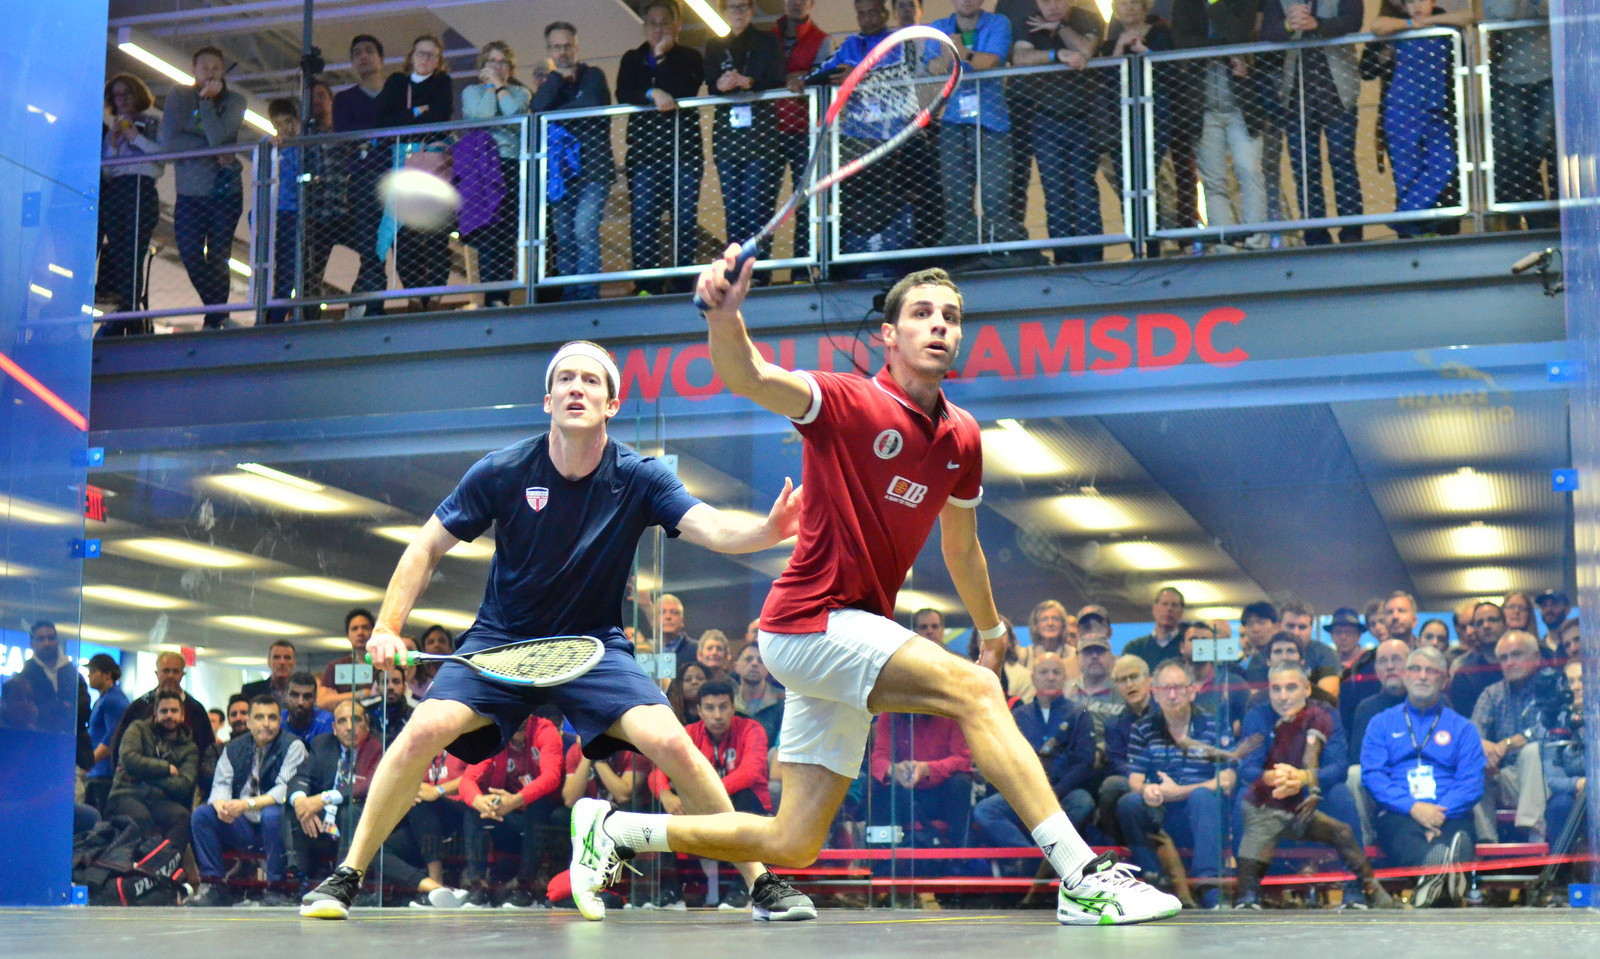 Egypt defeated the United States in the first game of the Men's World Team Squash Championship ©WSF